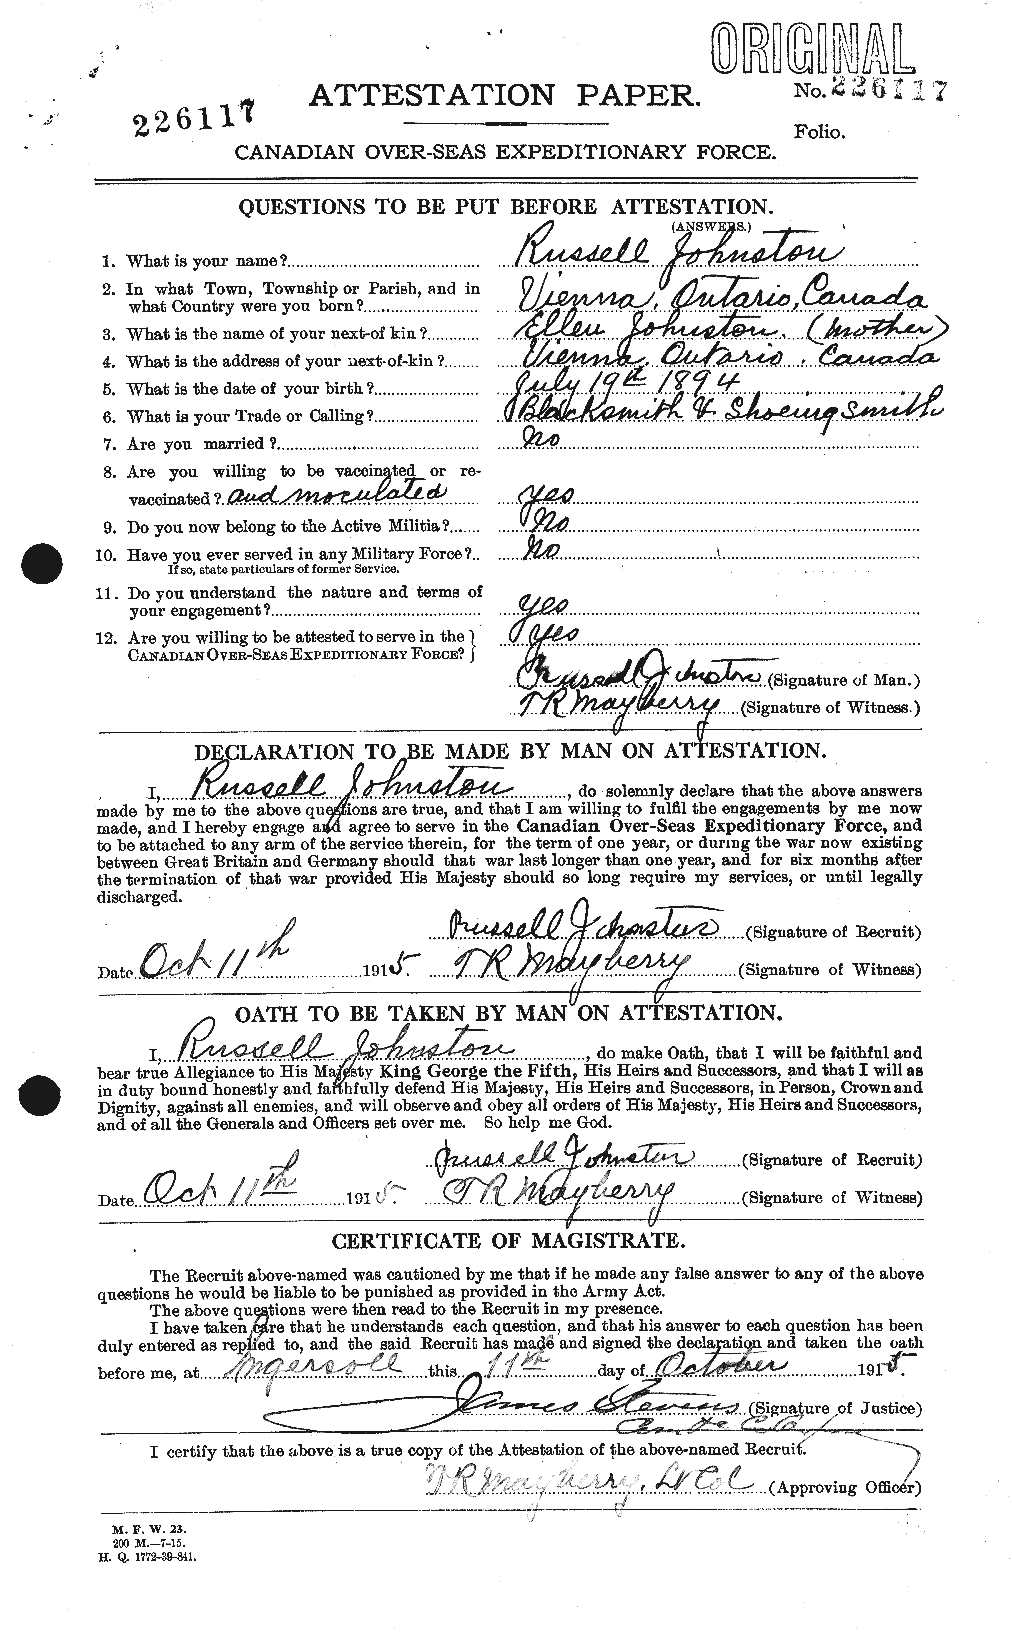 Personnel Records of the First World War - CEF 427071a